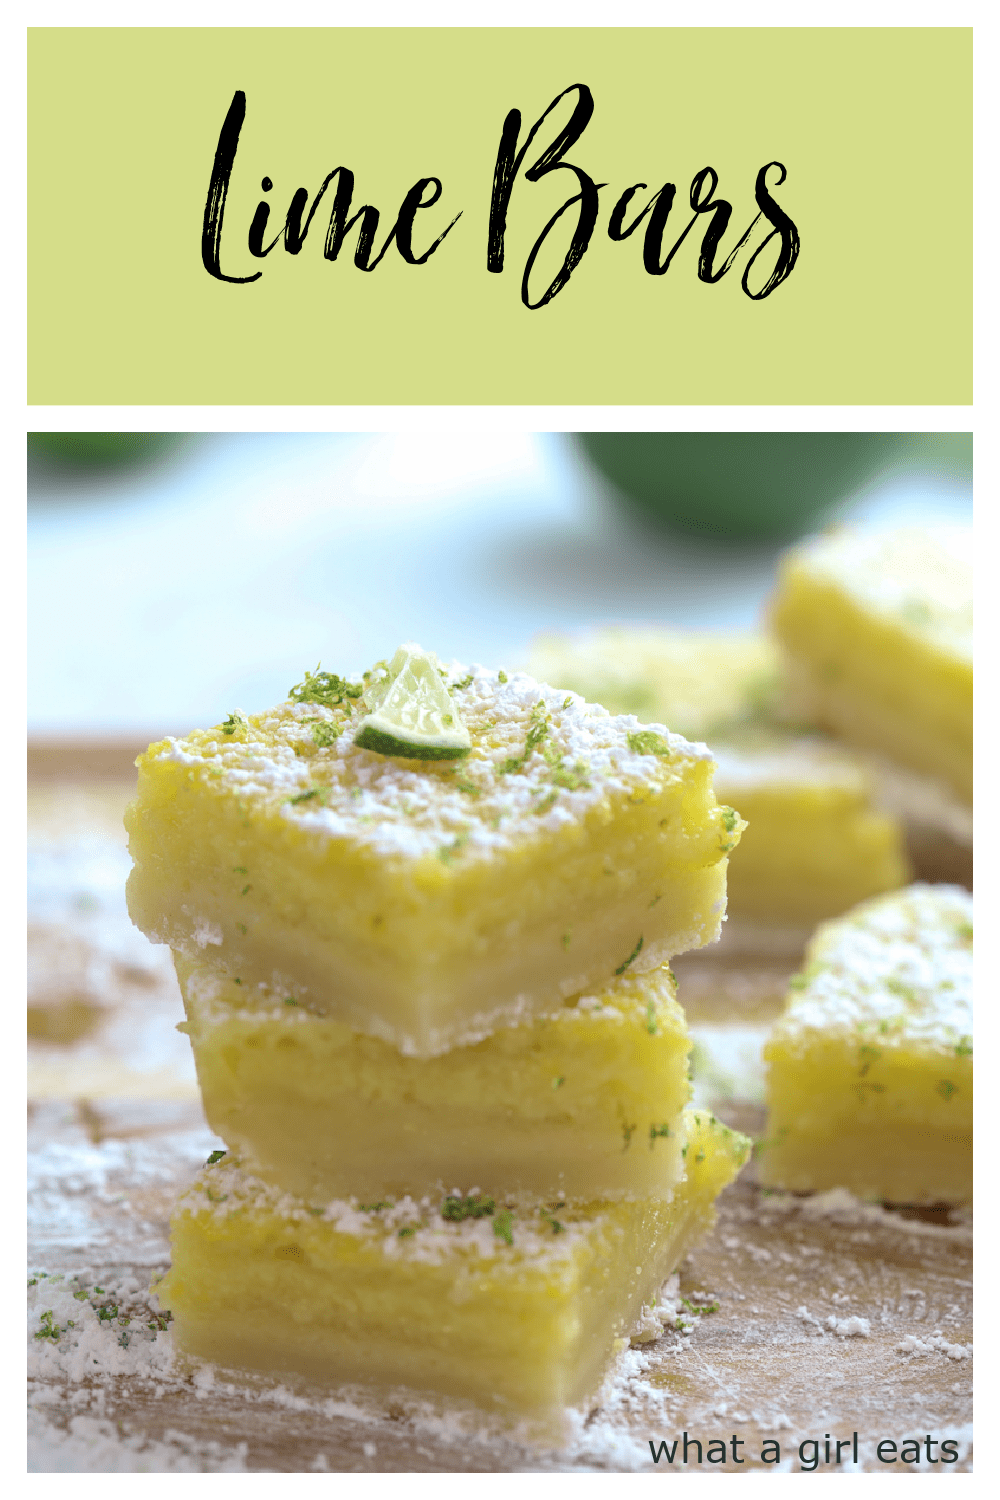 These tangy and creamy lime bars are dusted with powdered sugar for a delicious and easy dessert bar perfect for picnics or afternoon tea.